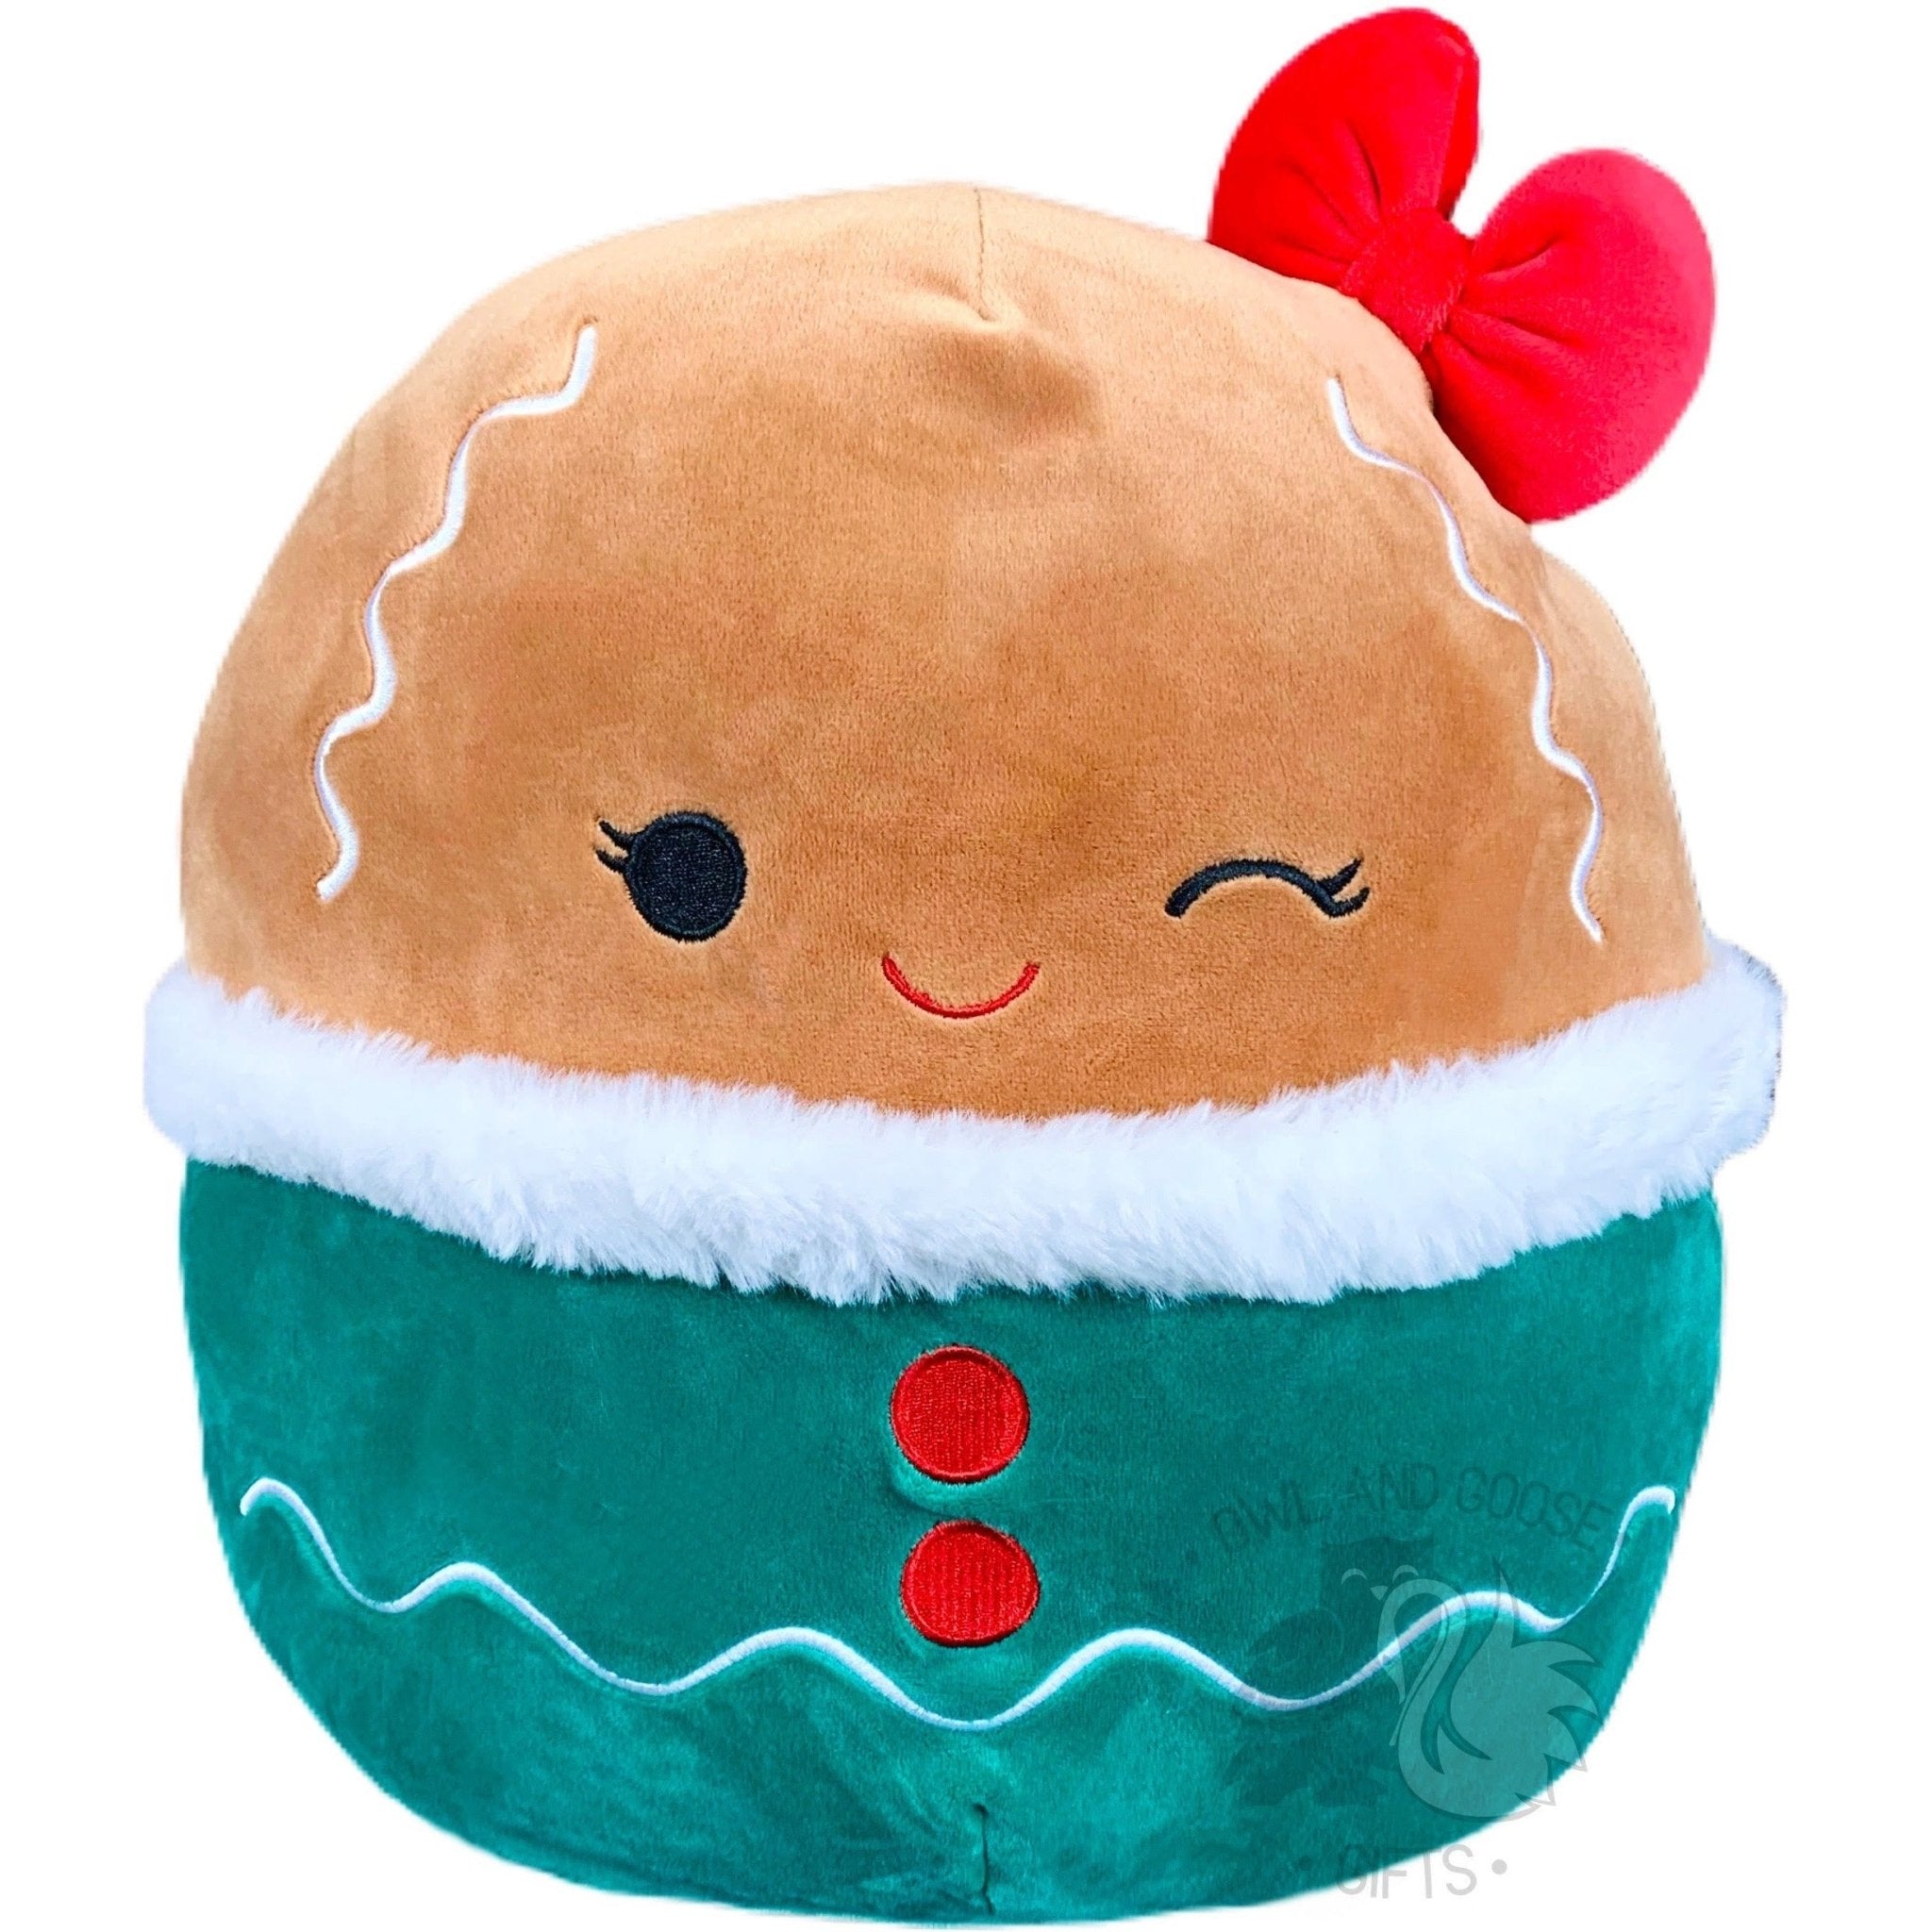 Squishmallow 12 Inch Gina the Gingerbread Girl Christmas Plush Toy